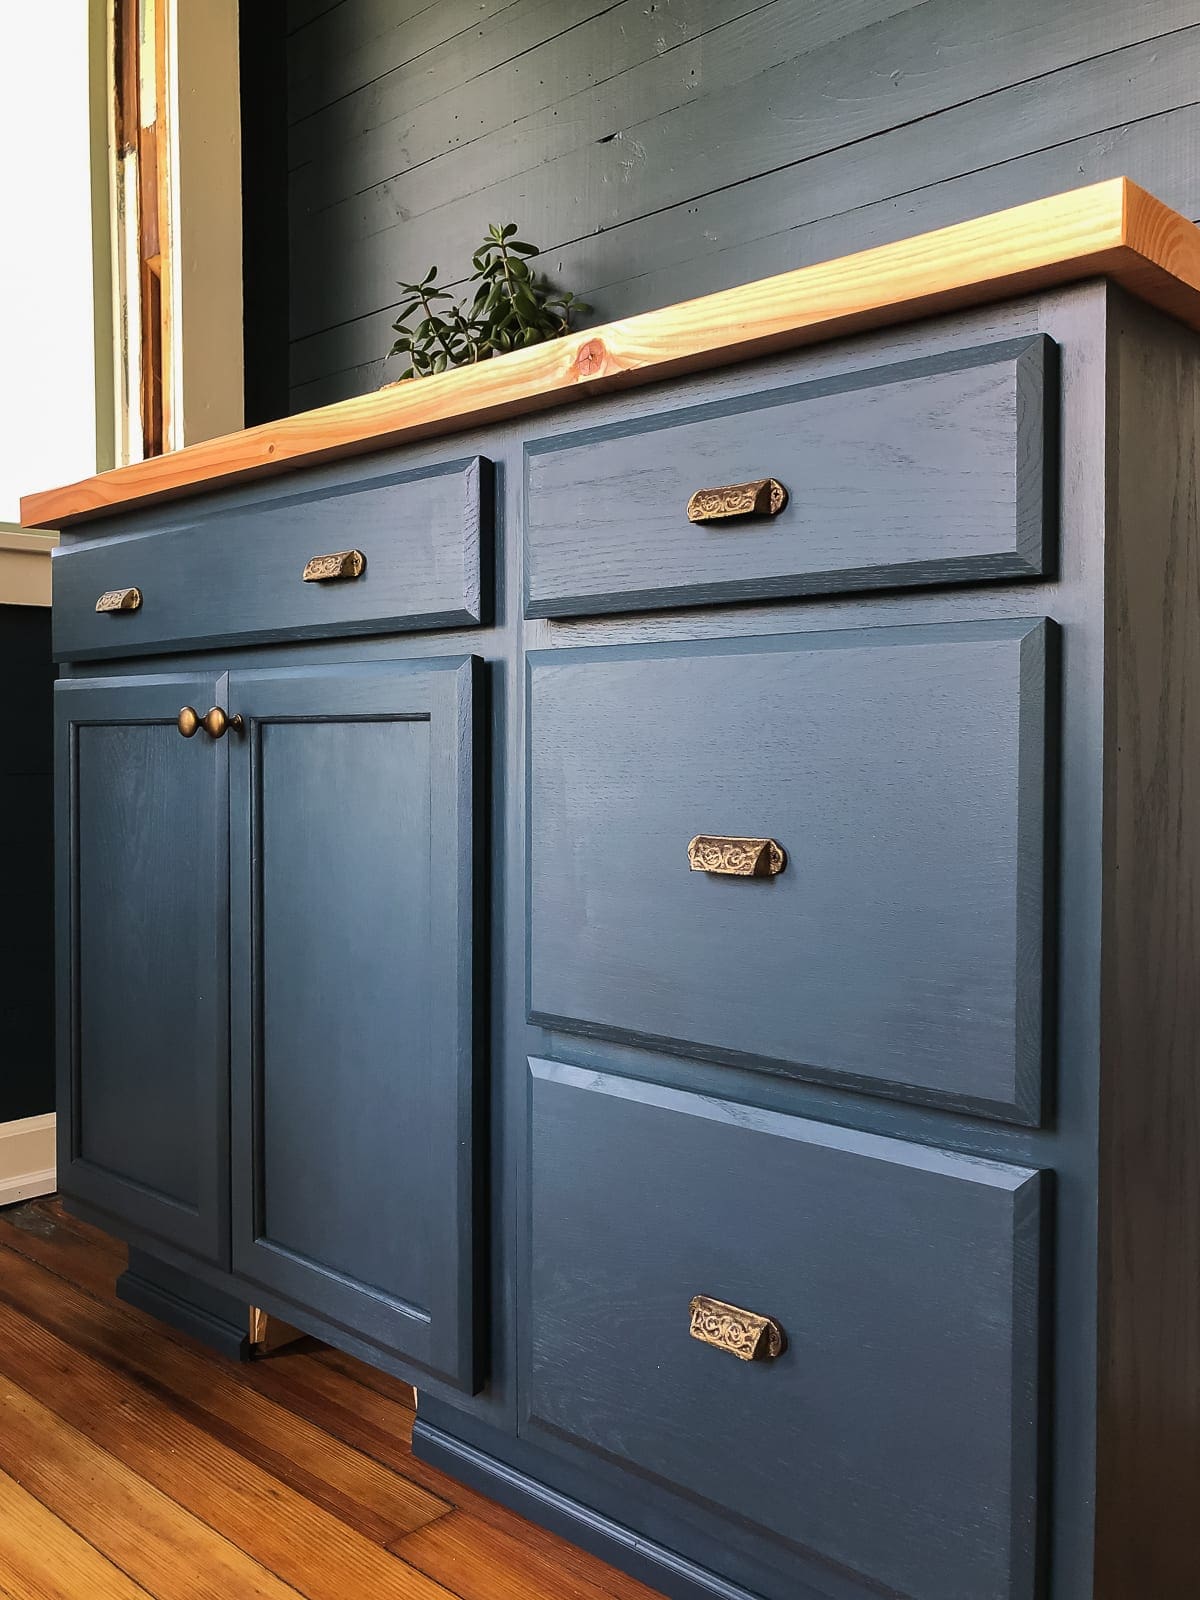 What oil-based material are you all using to paint kitchen cabinets, and  what is your process if you were going to brush them? Spraying seems to be  the go-to method, but I'm